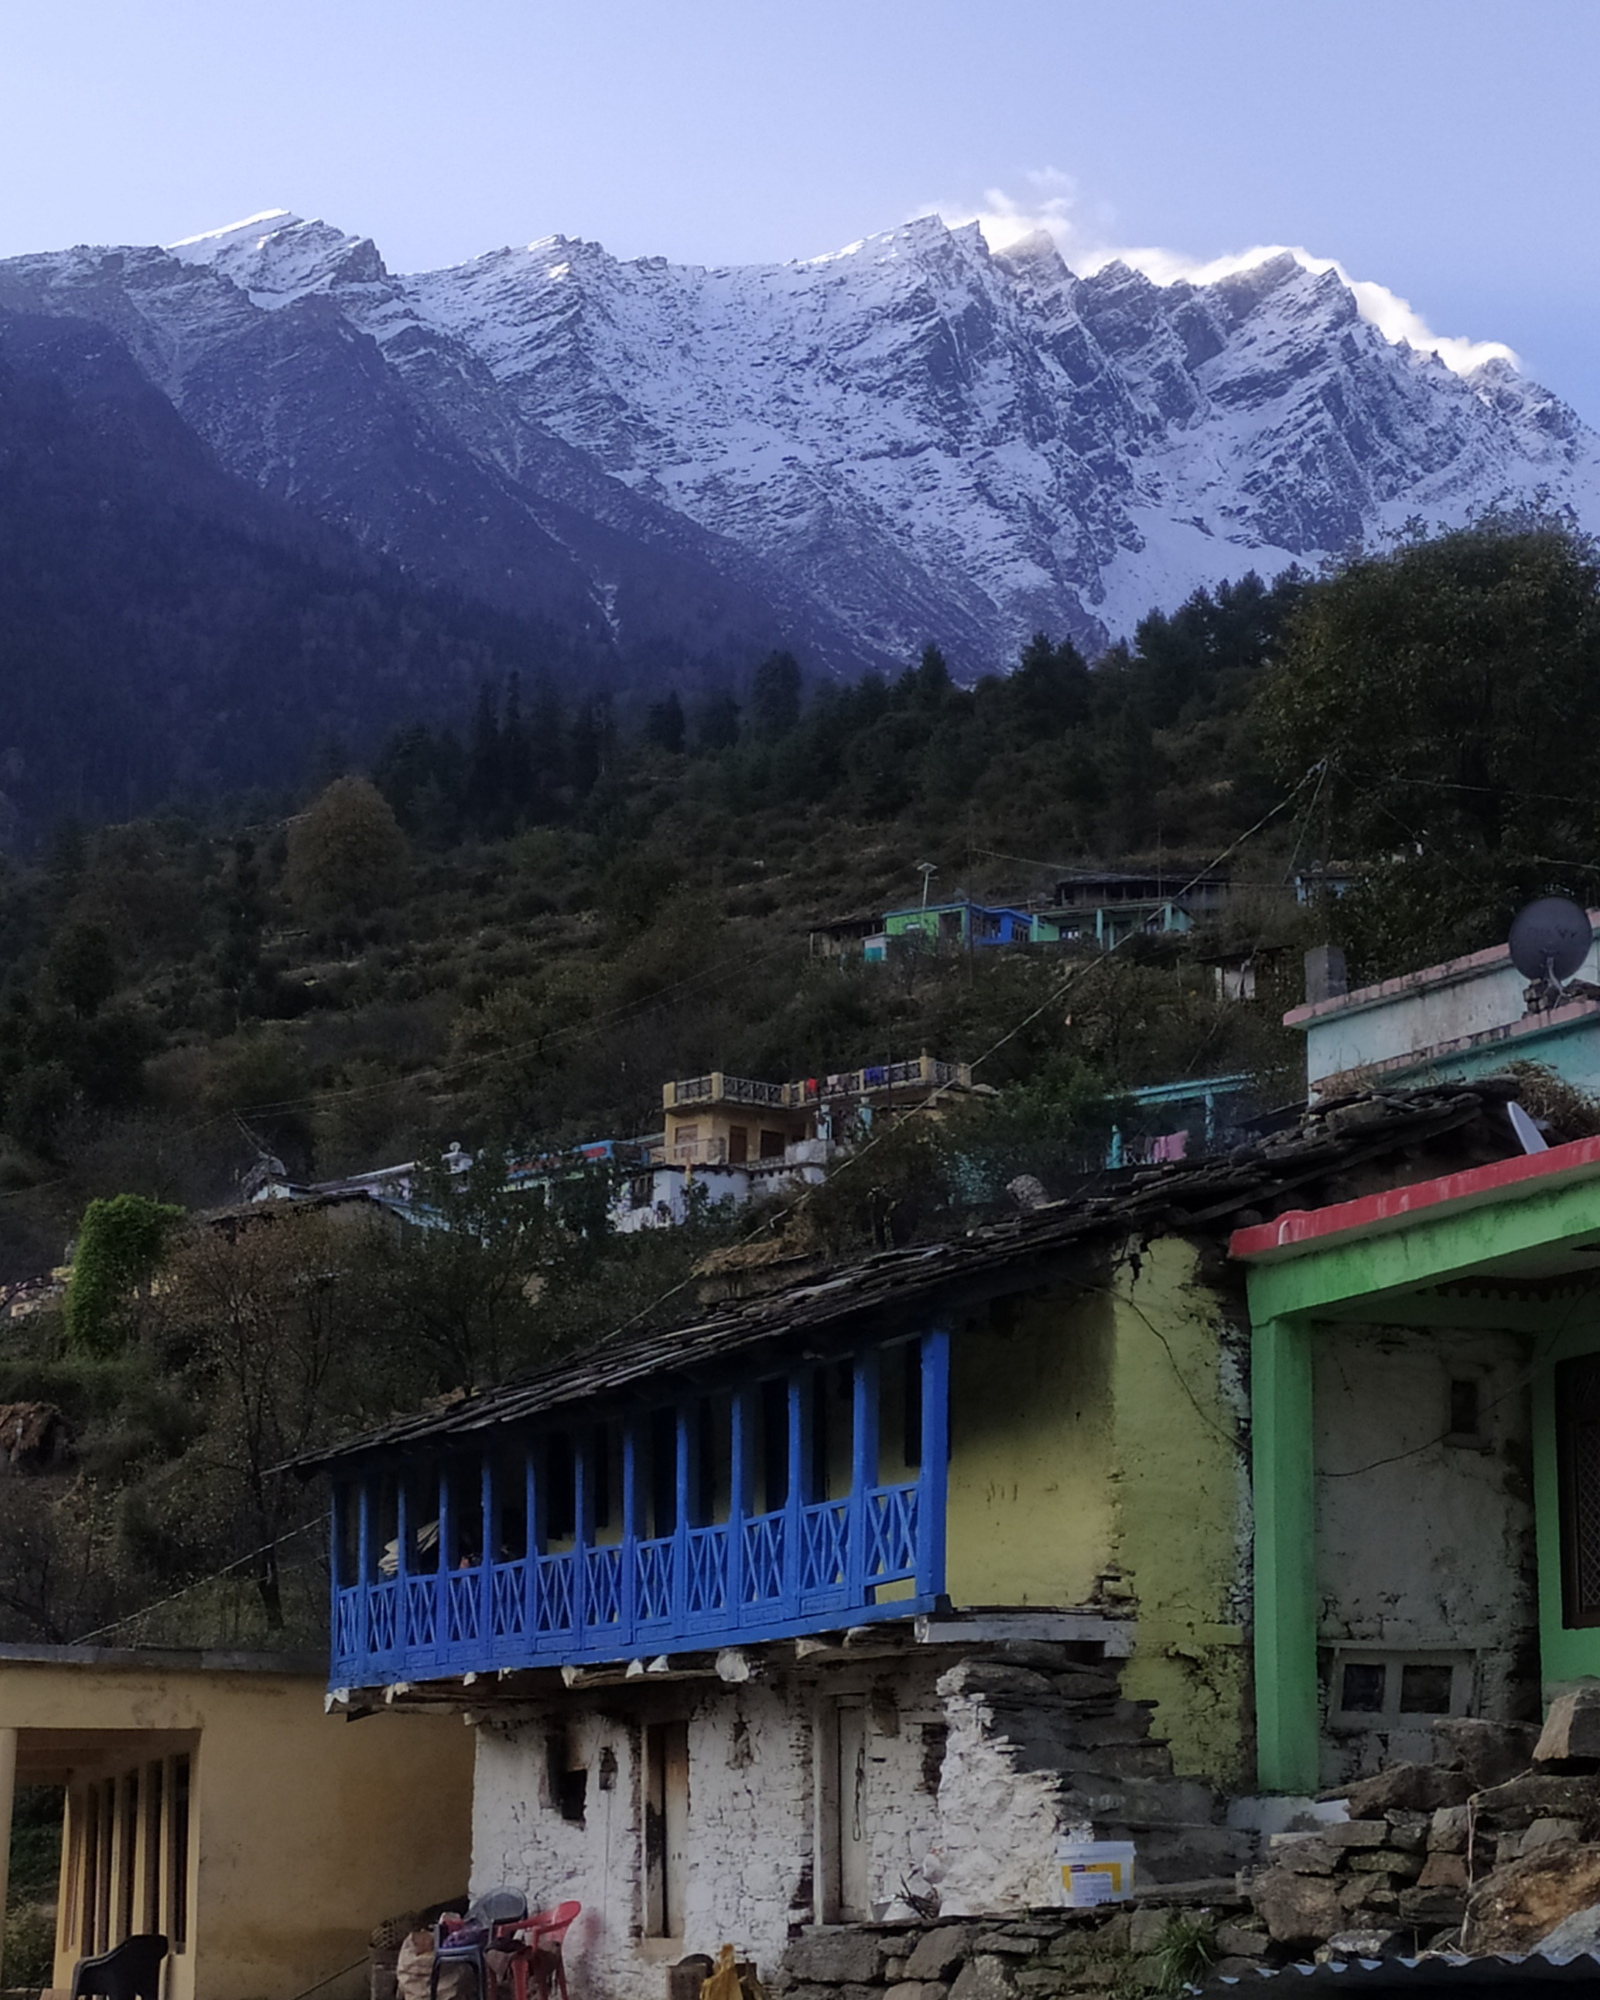 Offbeat places to visit in Uttarakhand